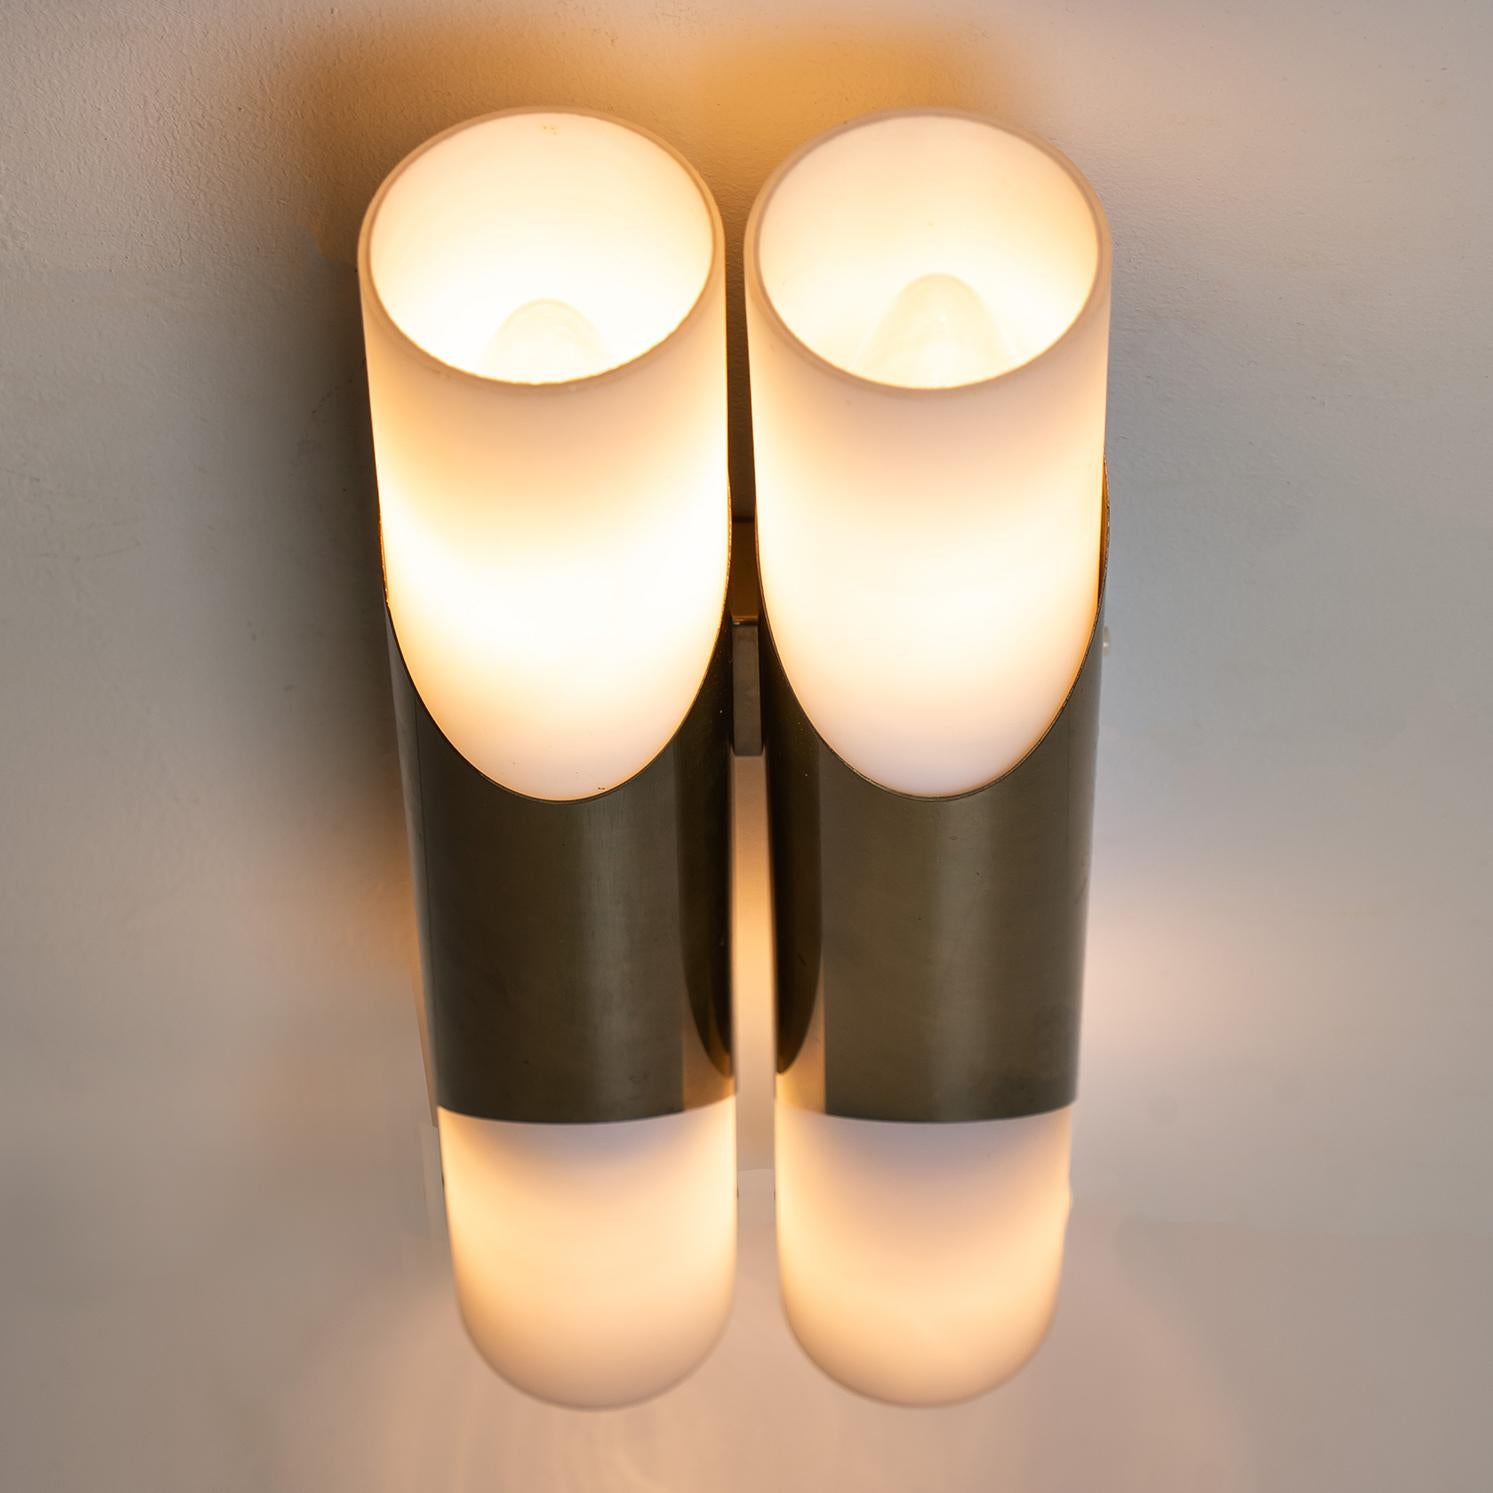 Four Wall Sconces or Wall Lights in the Style of RAAK Amsterdam, 1970 For Sale 6